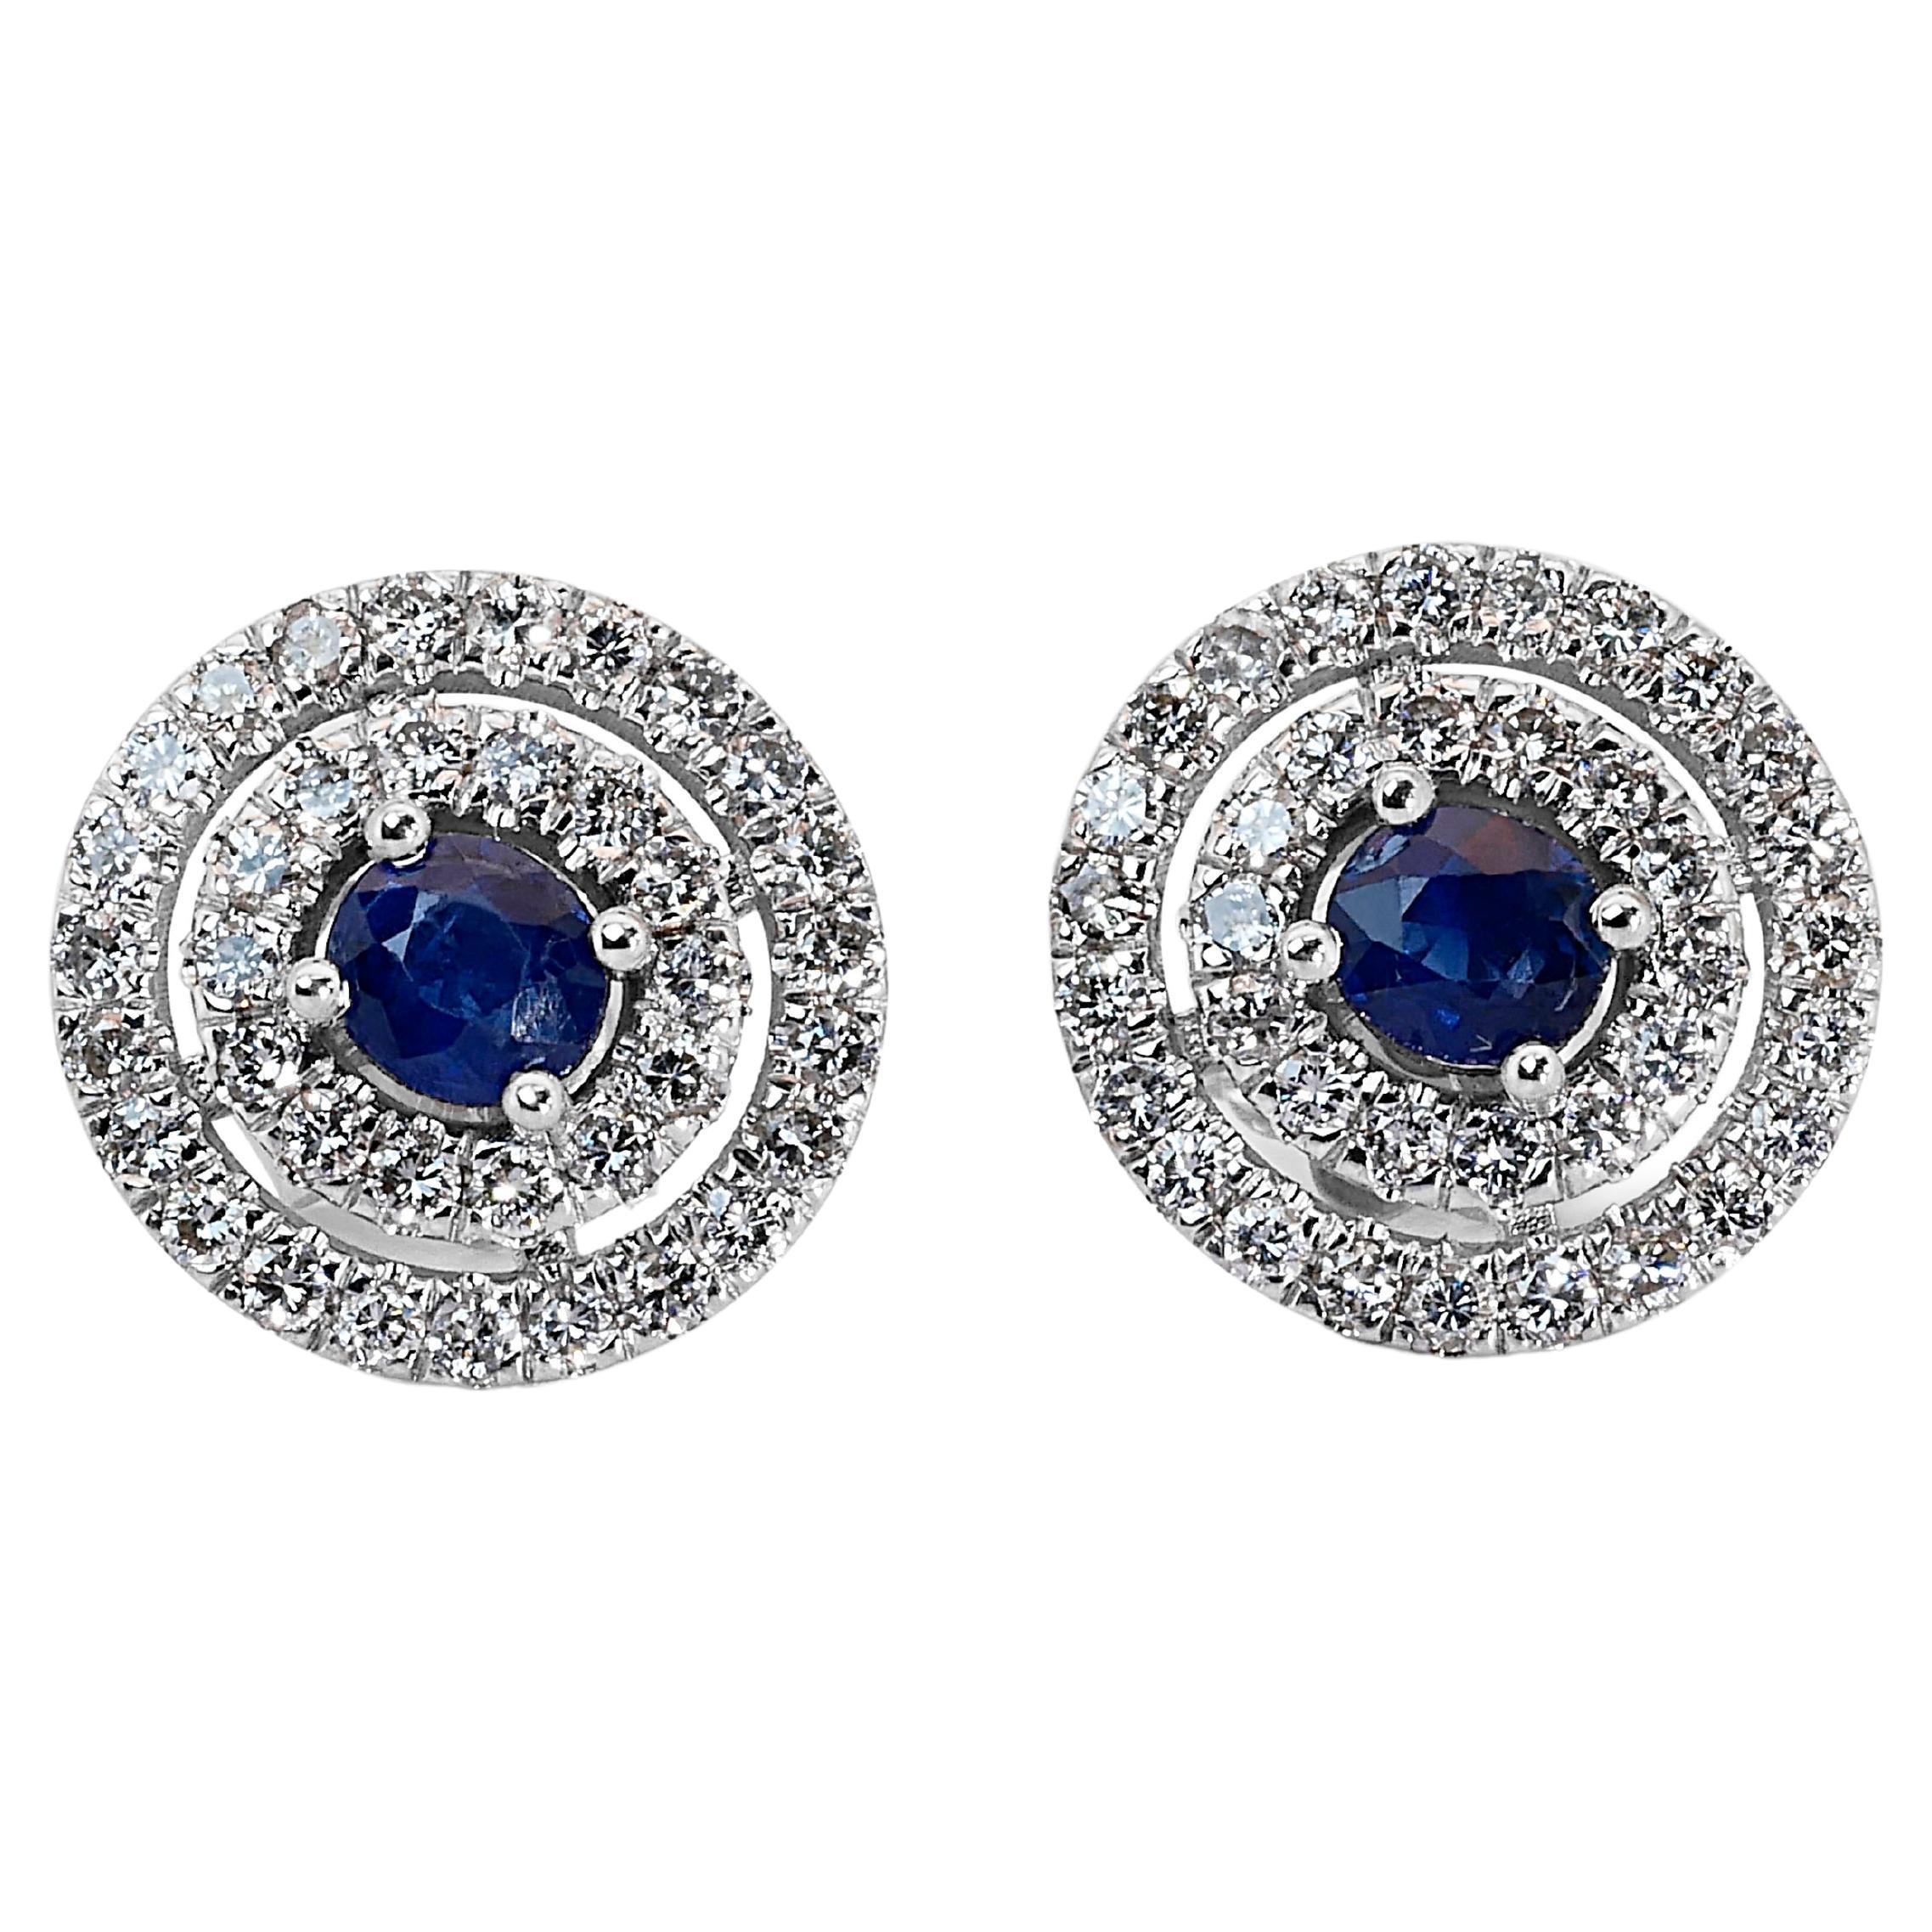 18k White Gold Earrings w/ 1.68ct Sapphire and Natural Diamonds IGI Certificate For Sale